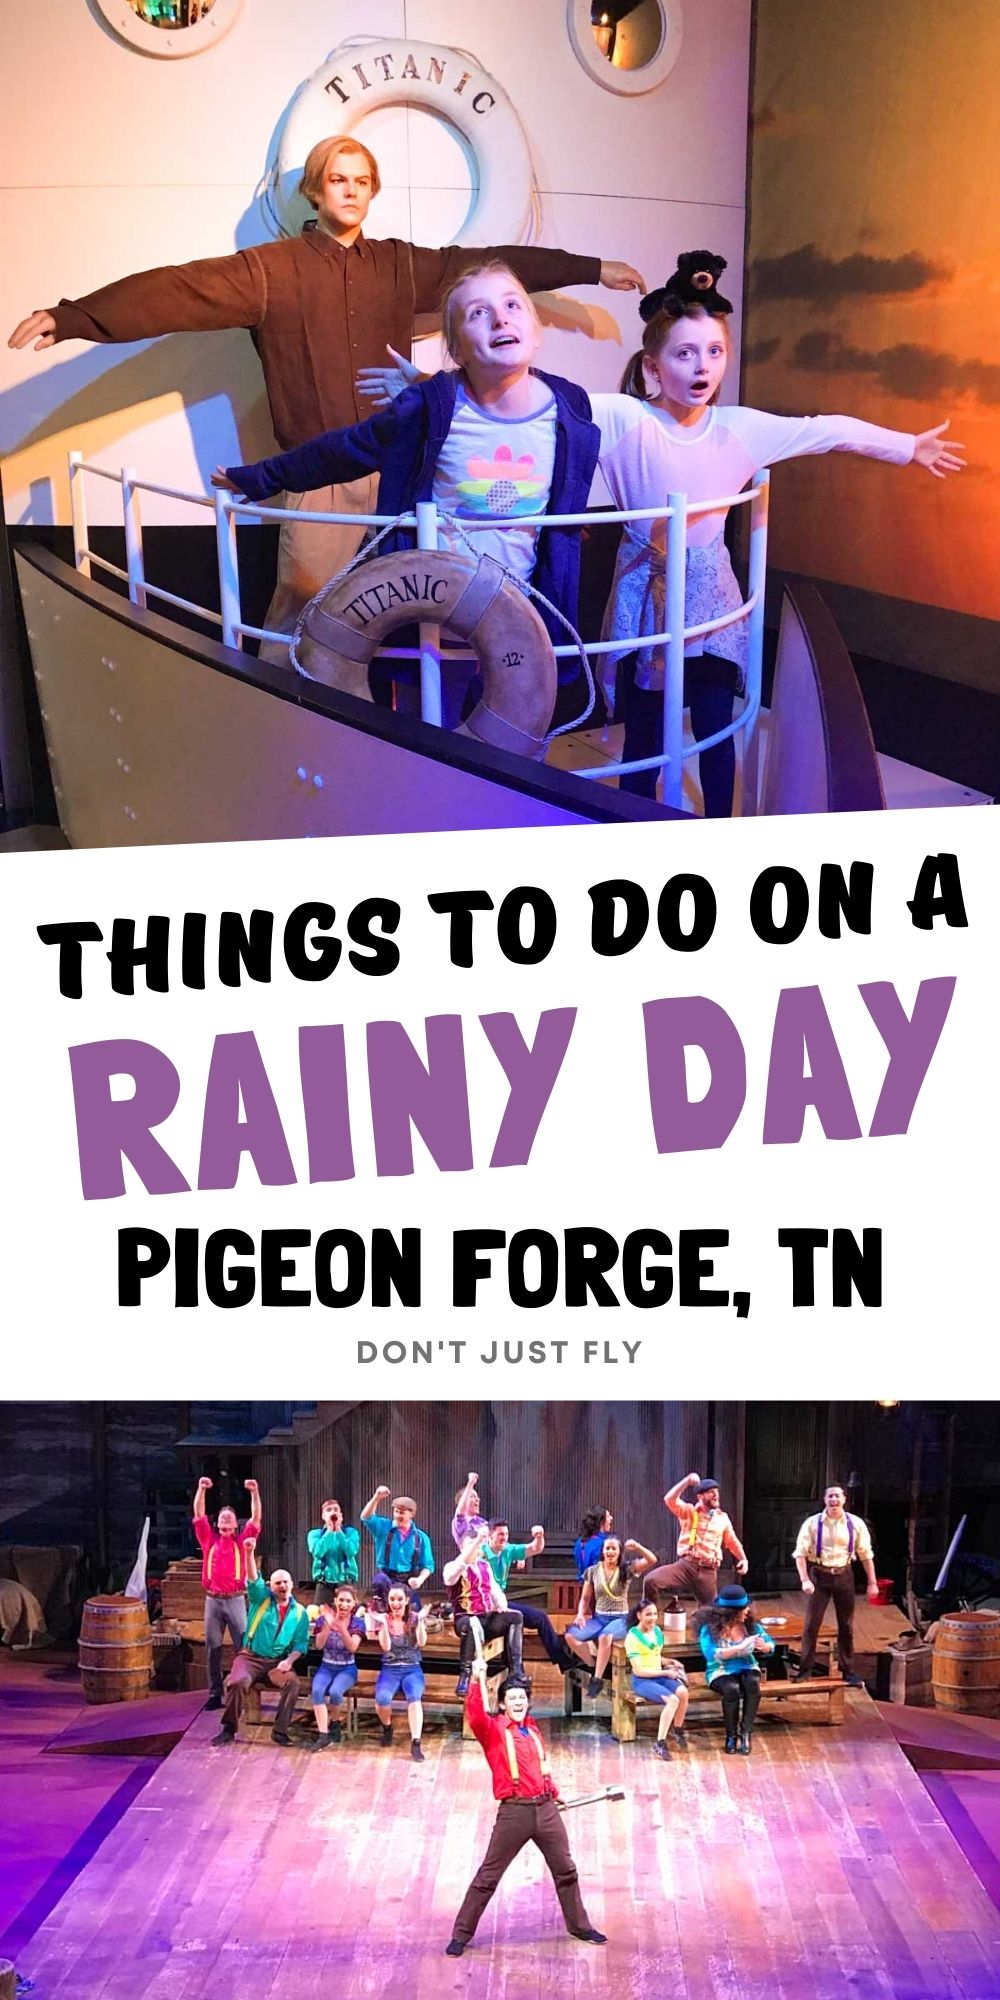 A photo collage shows fun indoor activities in Pigeon Forge.